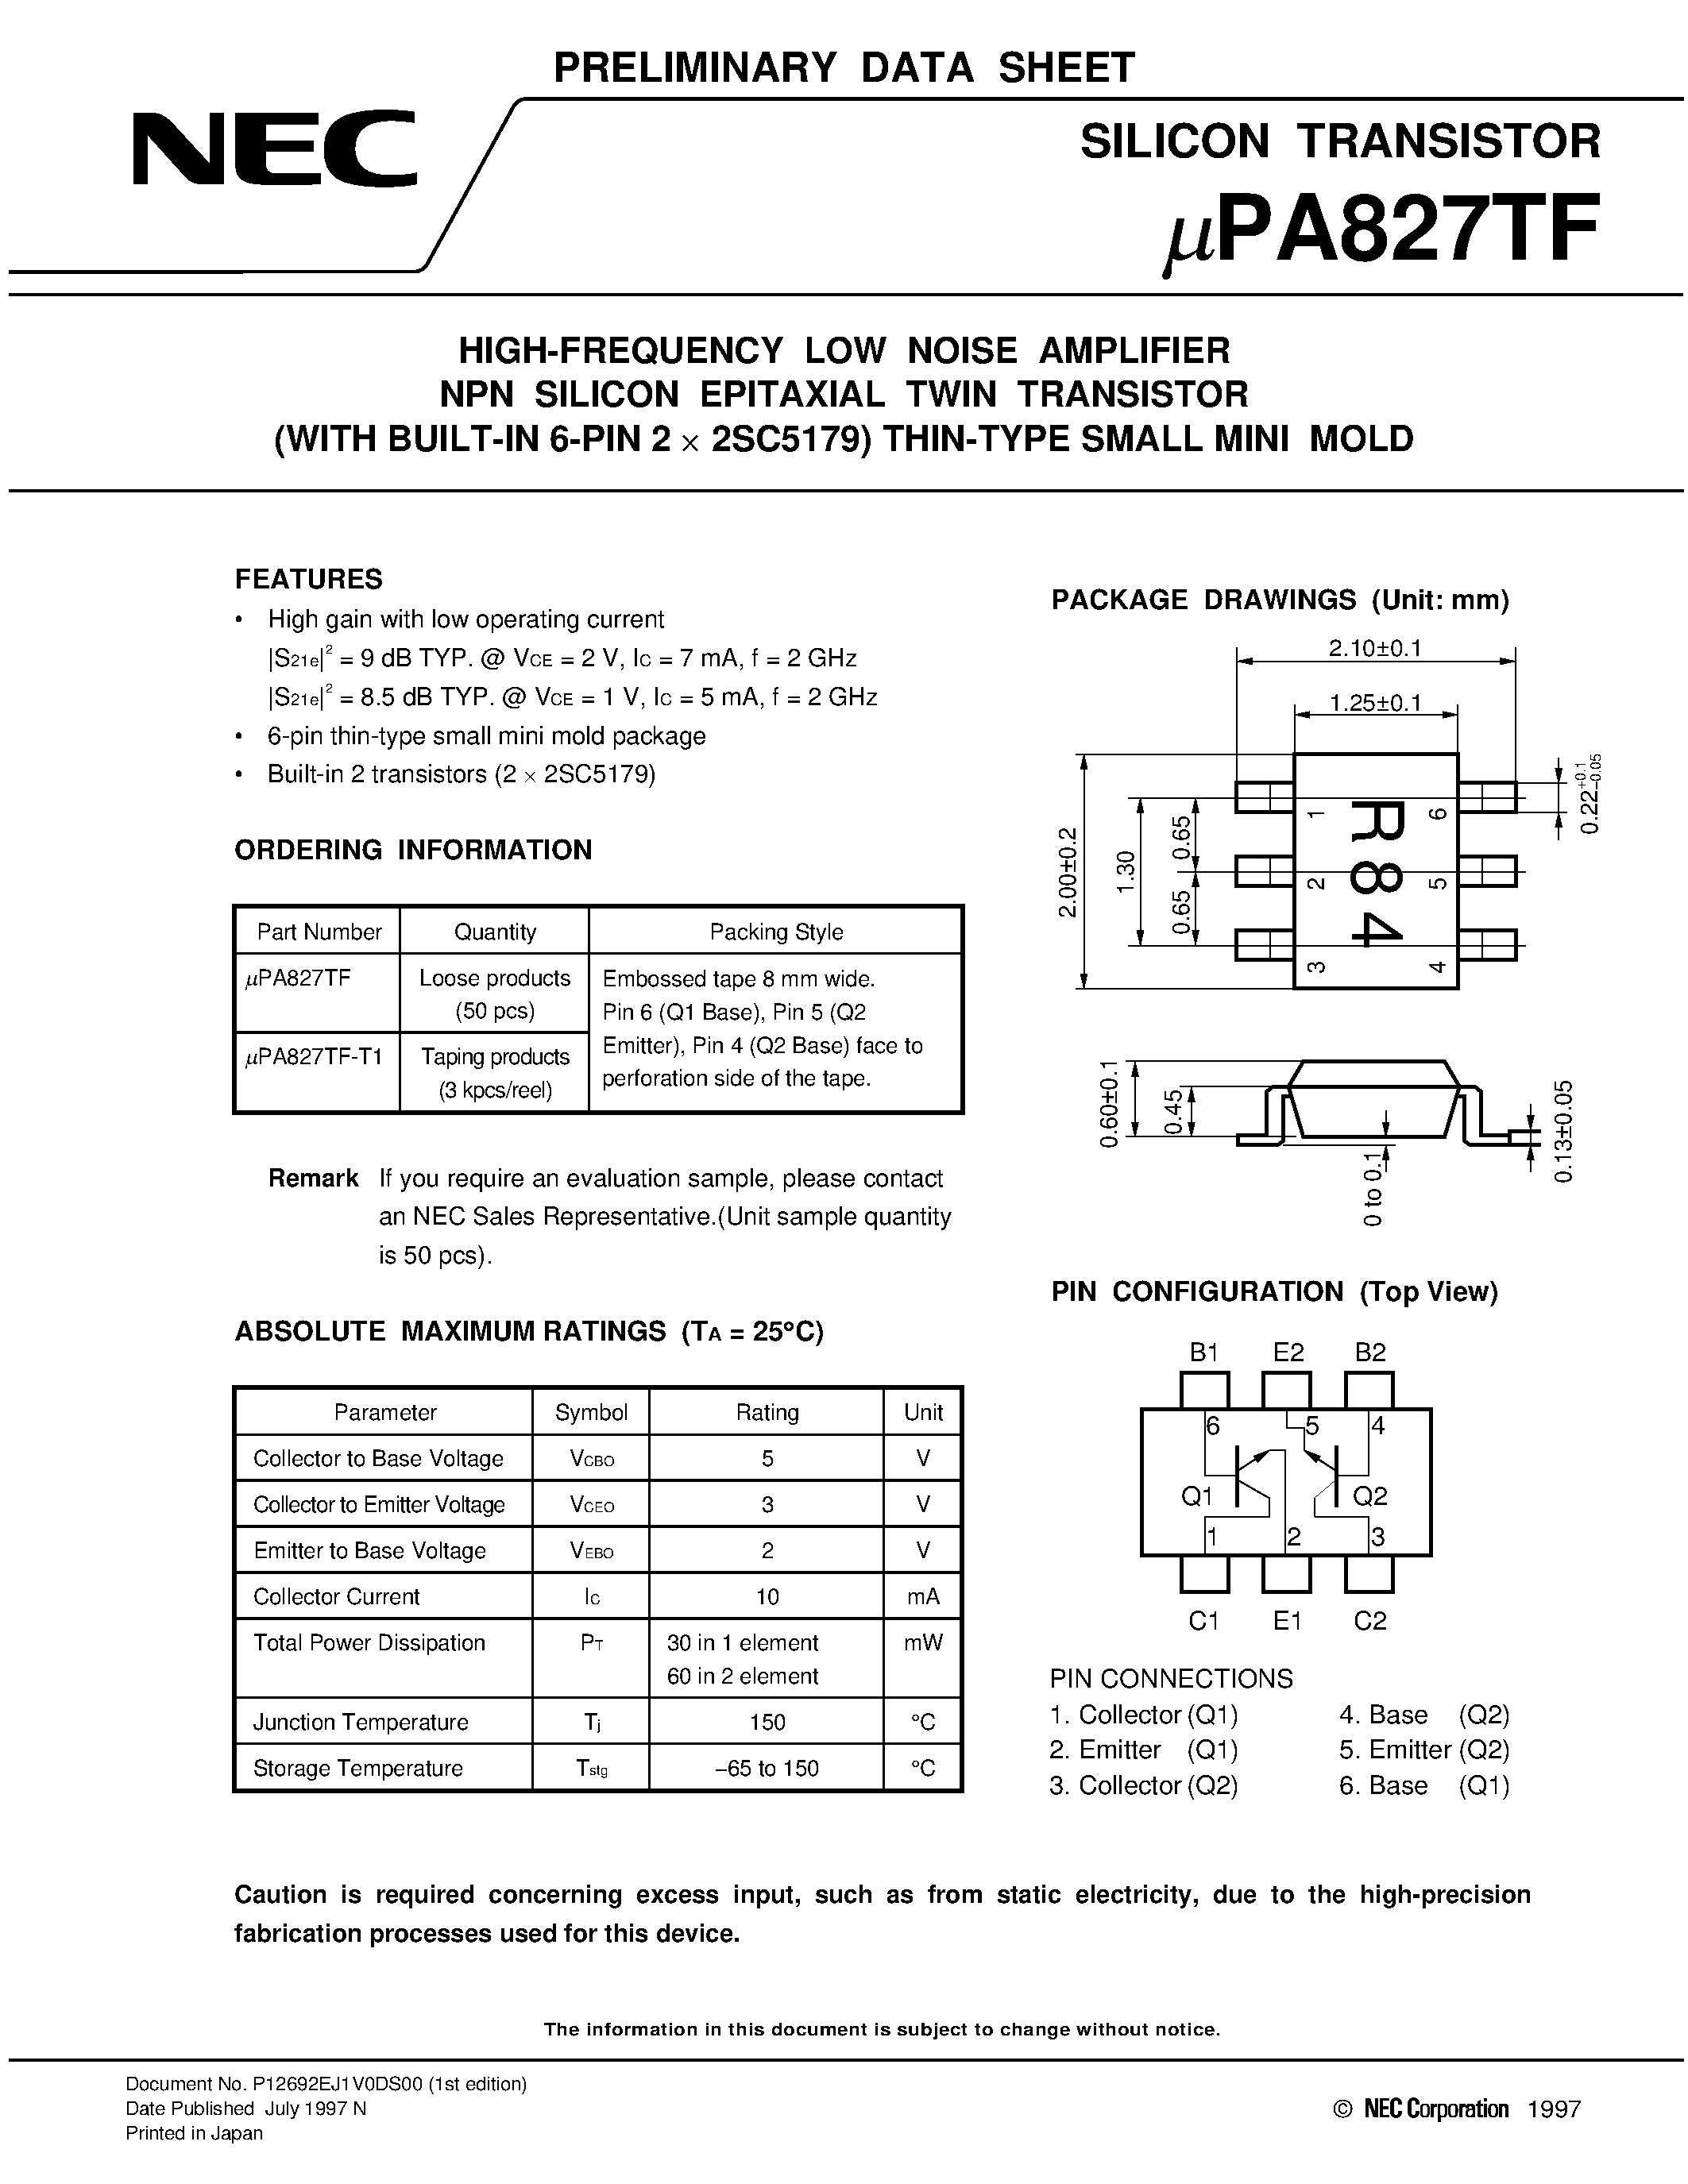 Datasheet UPA827TF - HIGH-FREQUENCY LOW NOISE AMPLIFIER NPN SILICON EPITAXIAL TWIN TRANSISTOR WITH BUILT-IN 6-PIN 2 x 2SC5179 THIN-TYPE SMALL MINI MOLD page 1